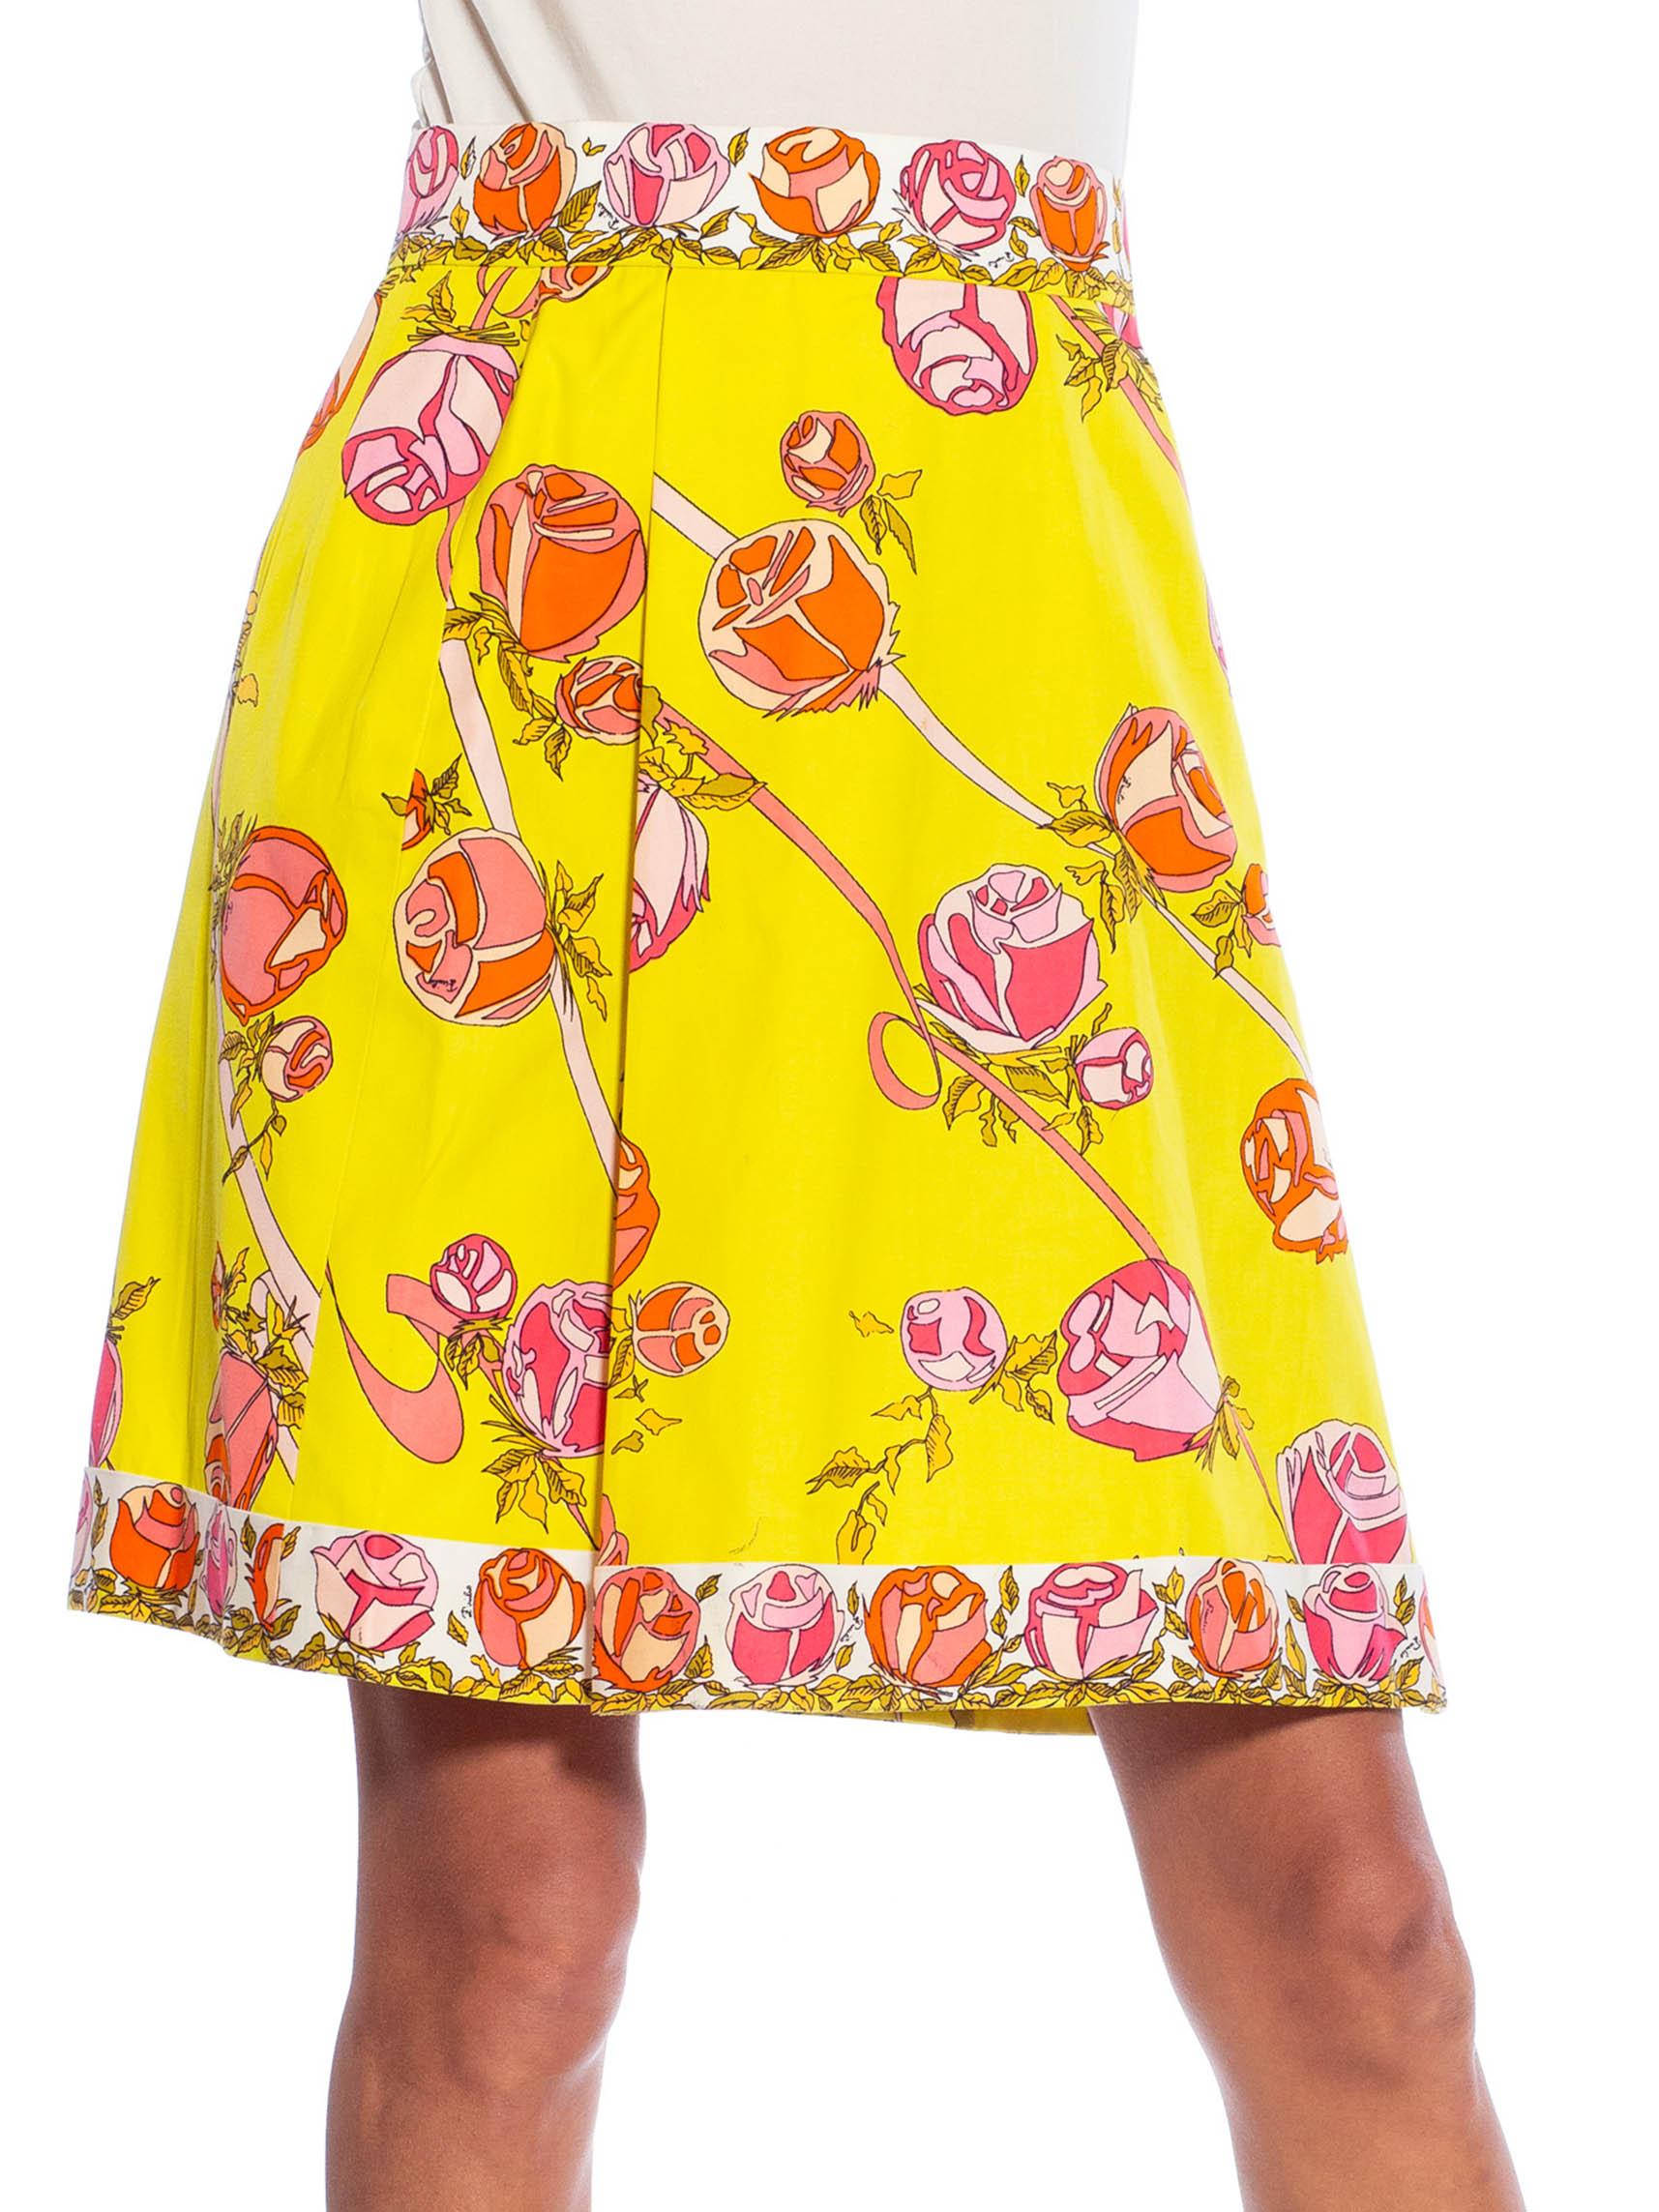 EMILIO PUCCI Yellow & Pink Cotton Floral Skirt For Sale 1